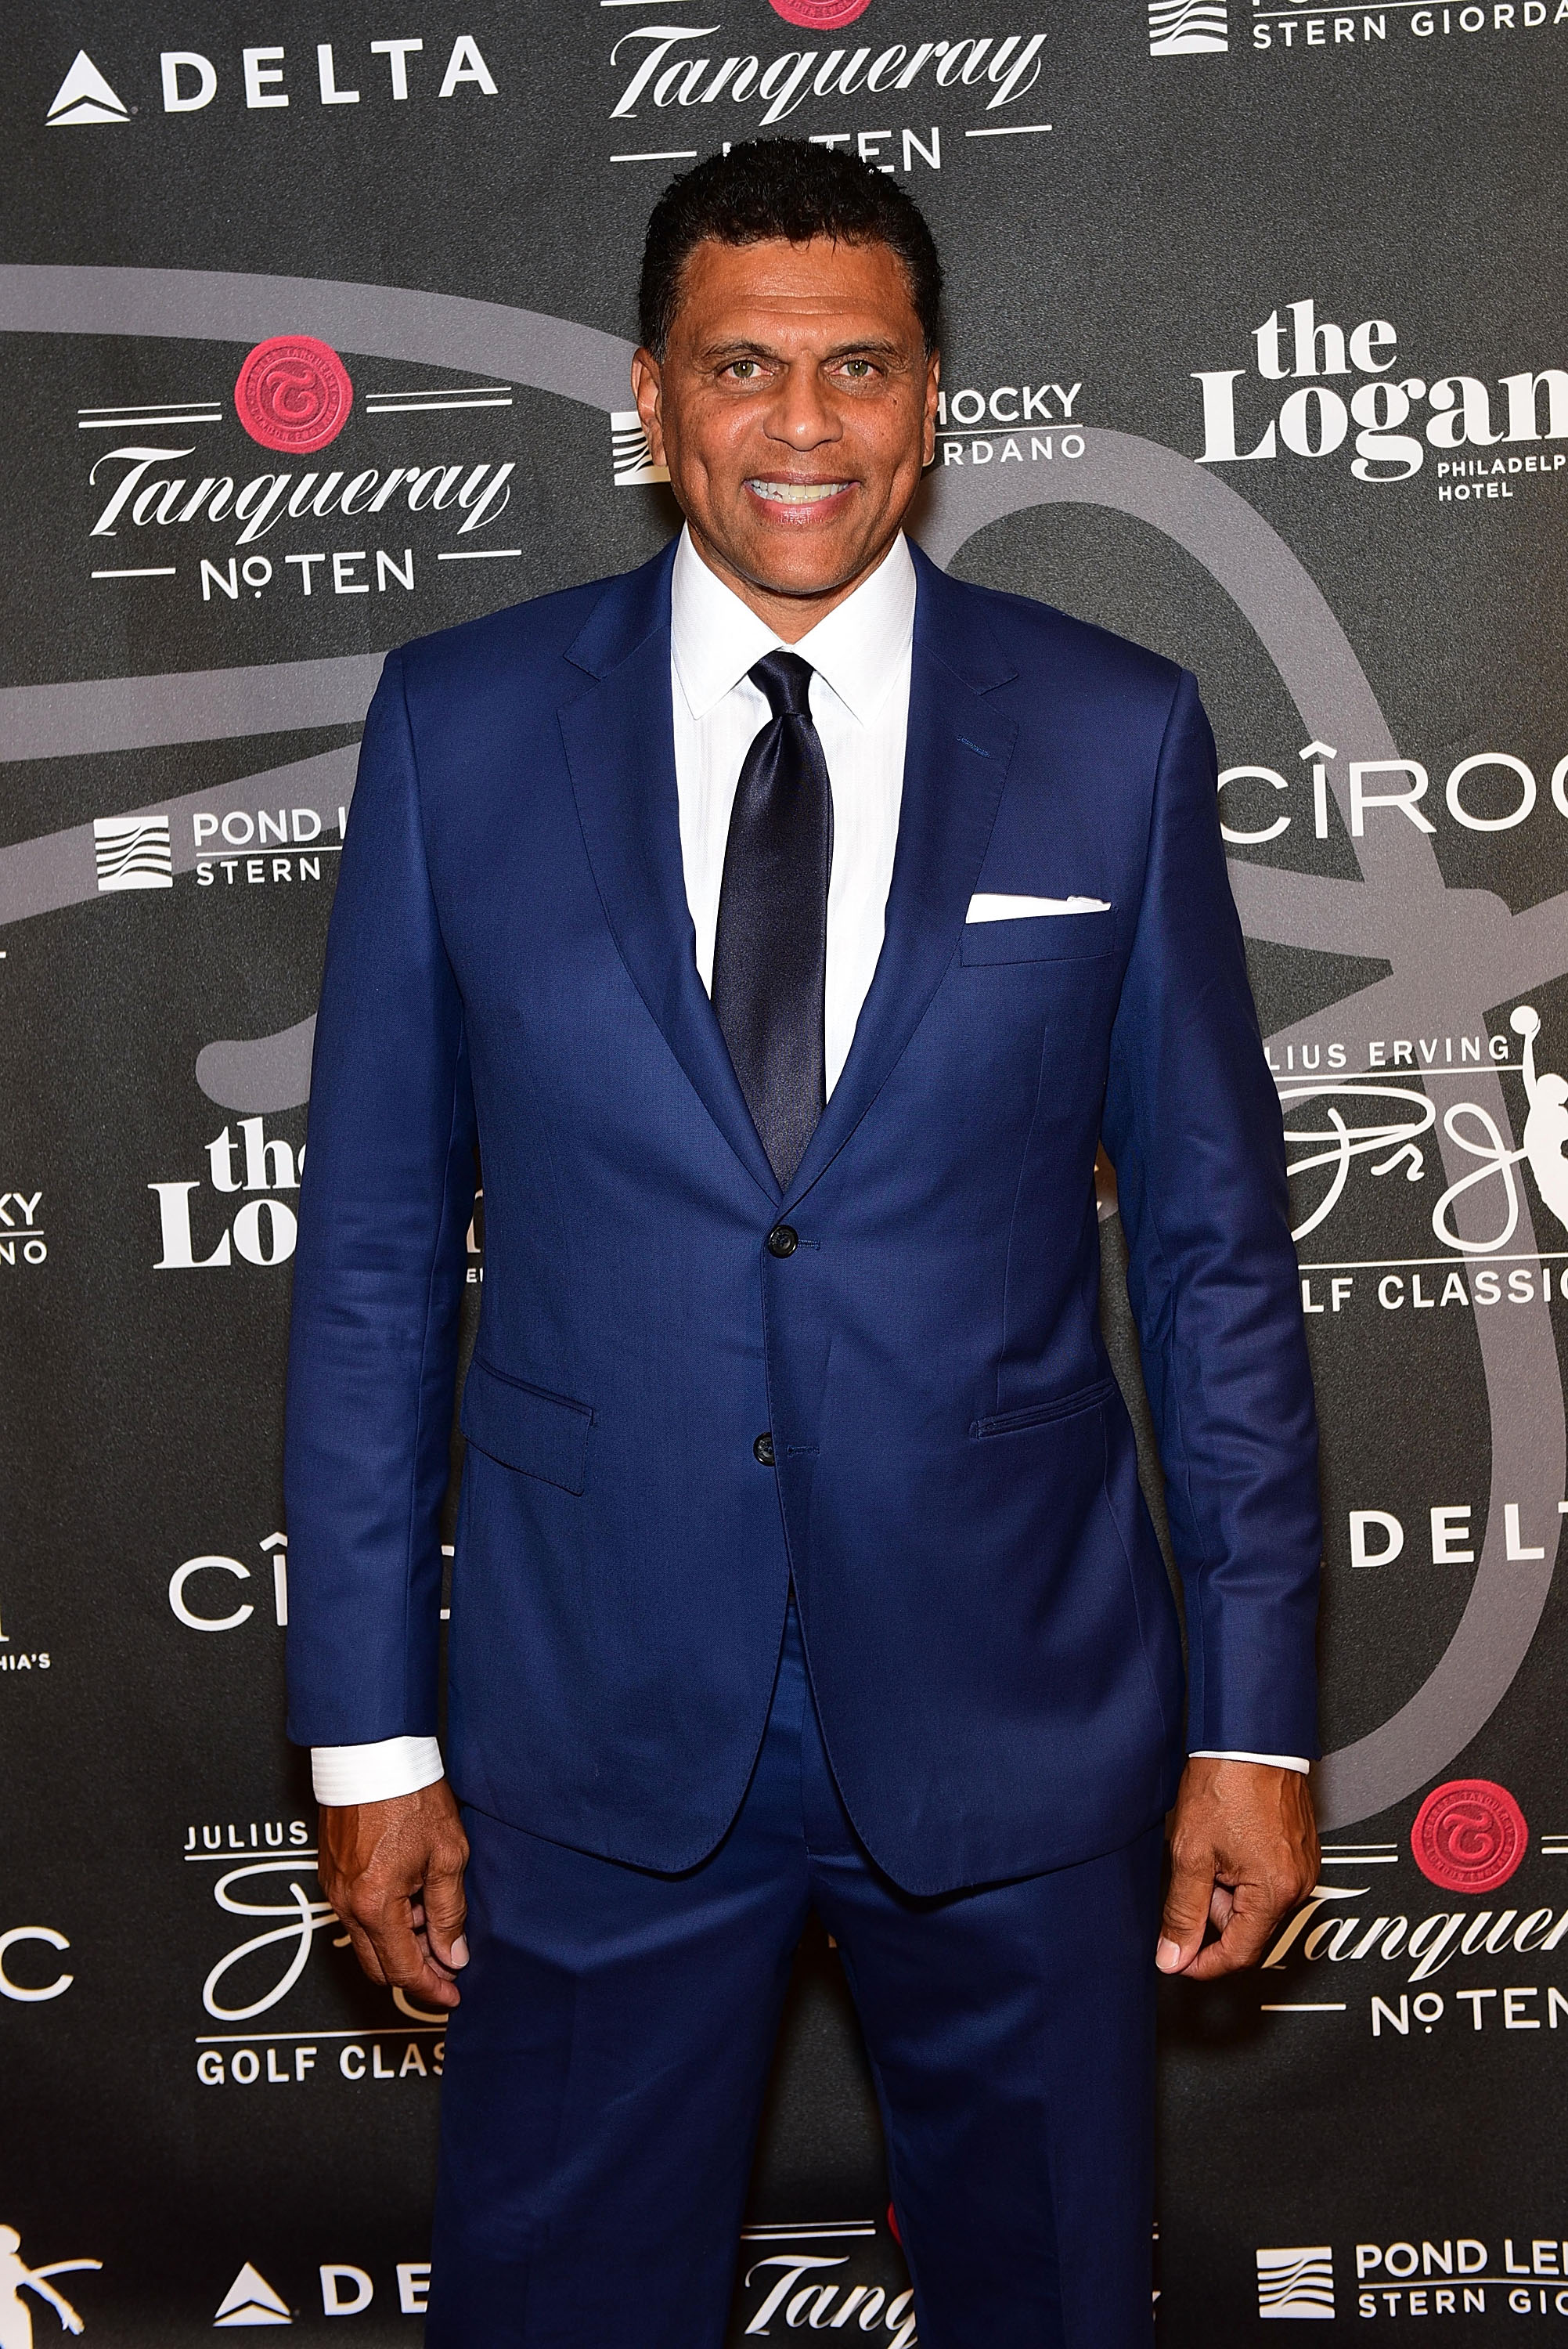 Reggie Theus walks the red carpet at The 2017 Erving Black Tie Ball and Pairings Party in Philadelphia wearing a custom JB Clothiers suit